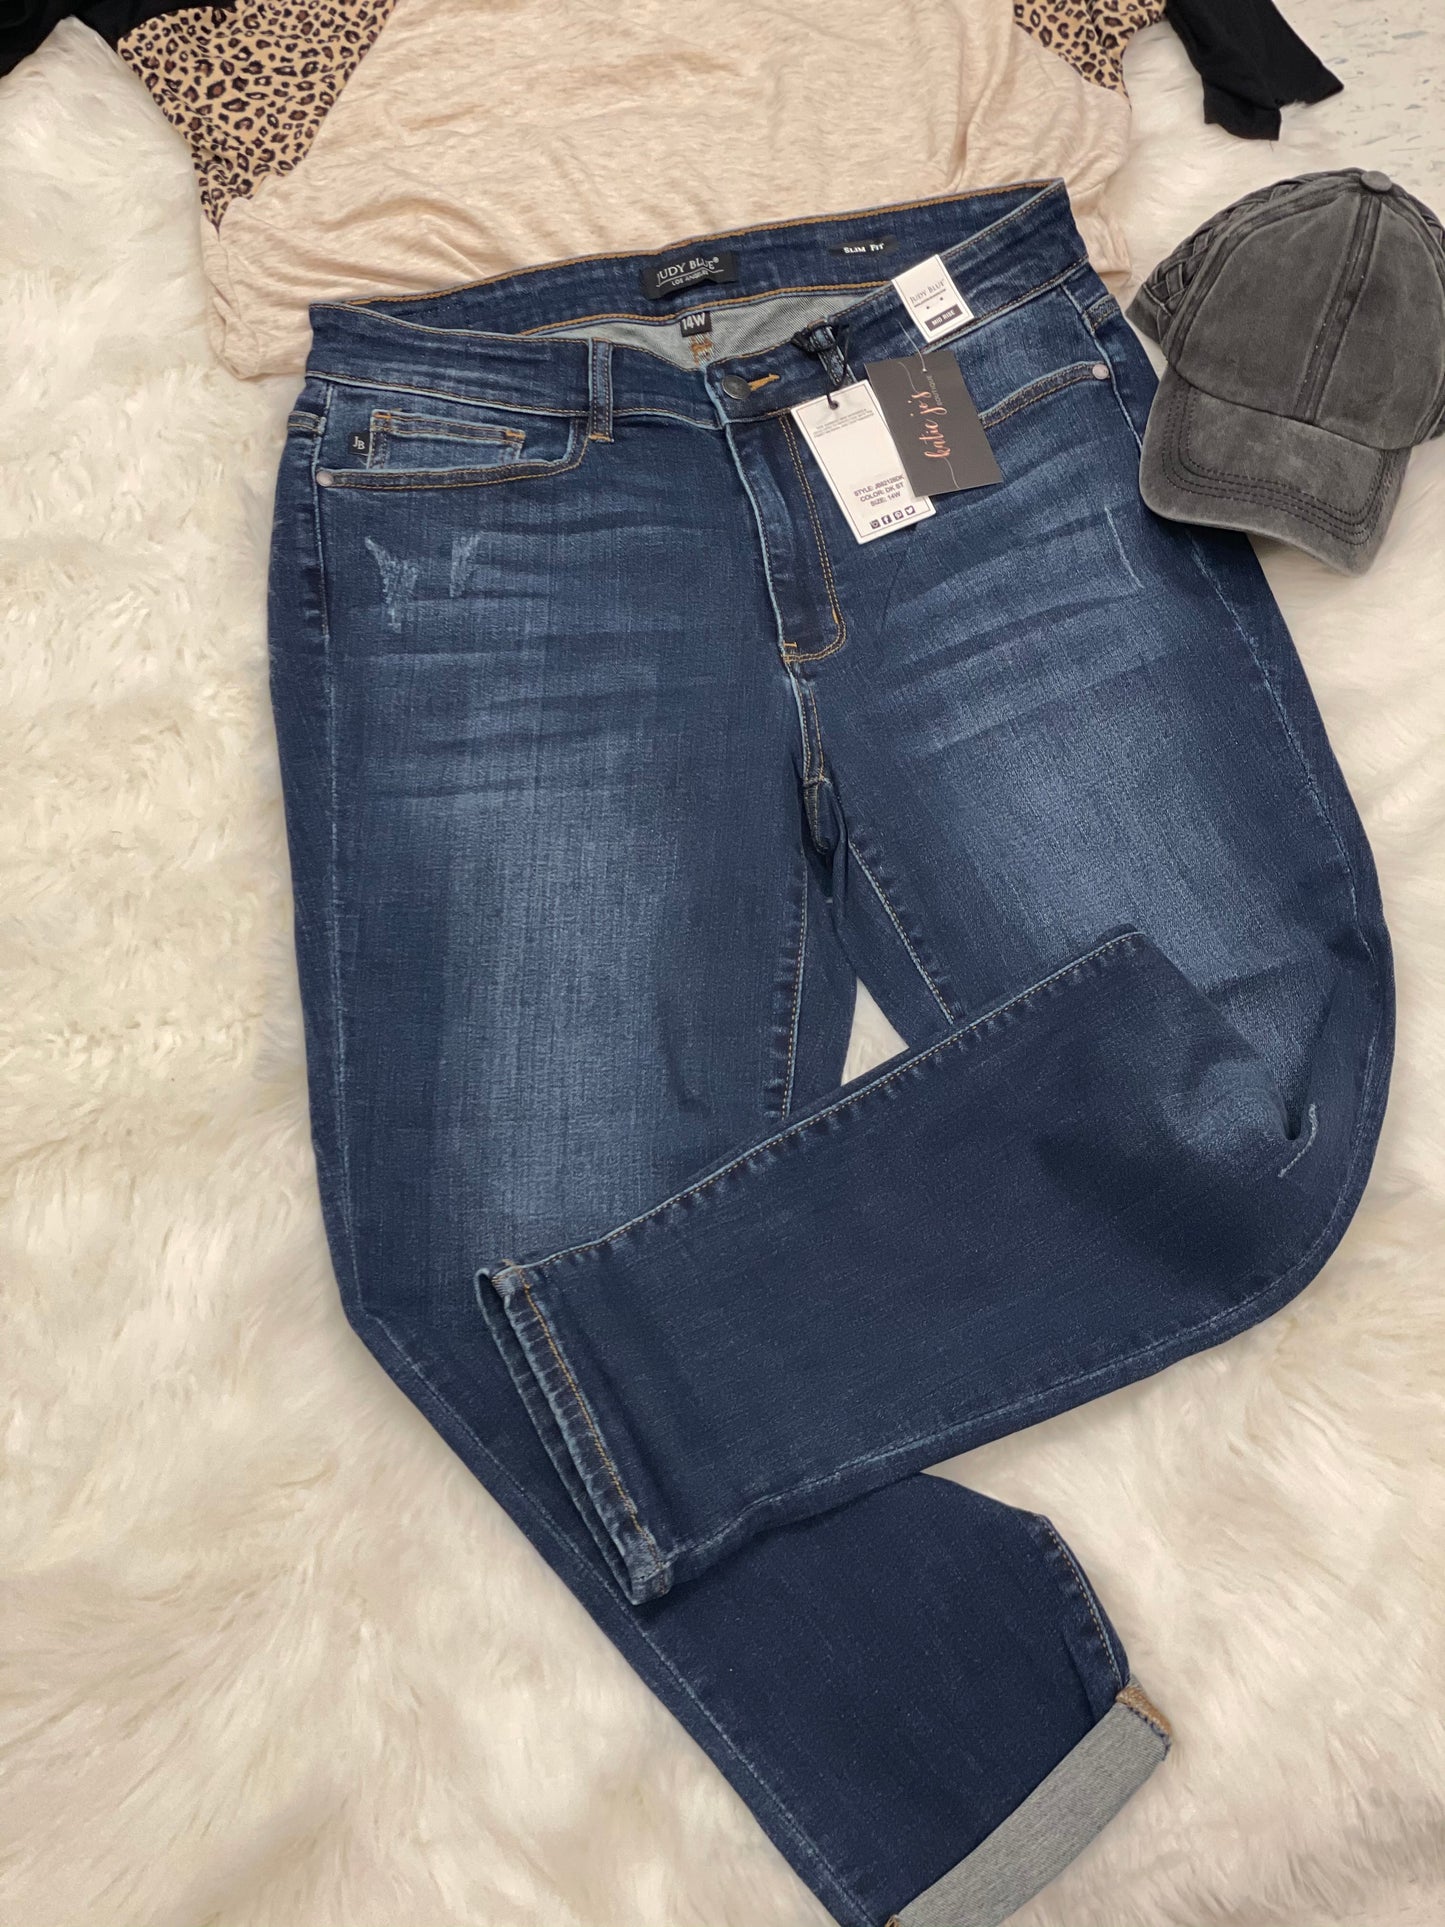 Judy Blue non distressed plus size jeans